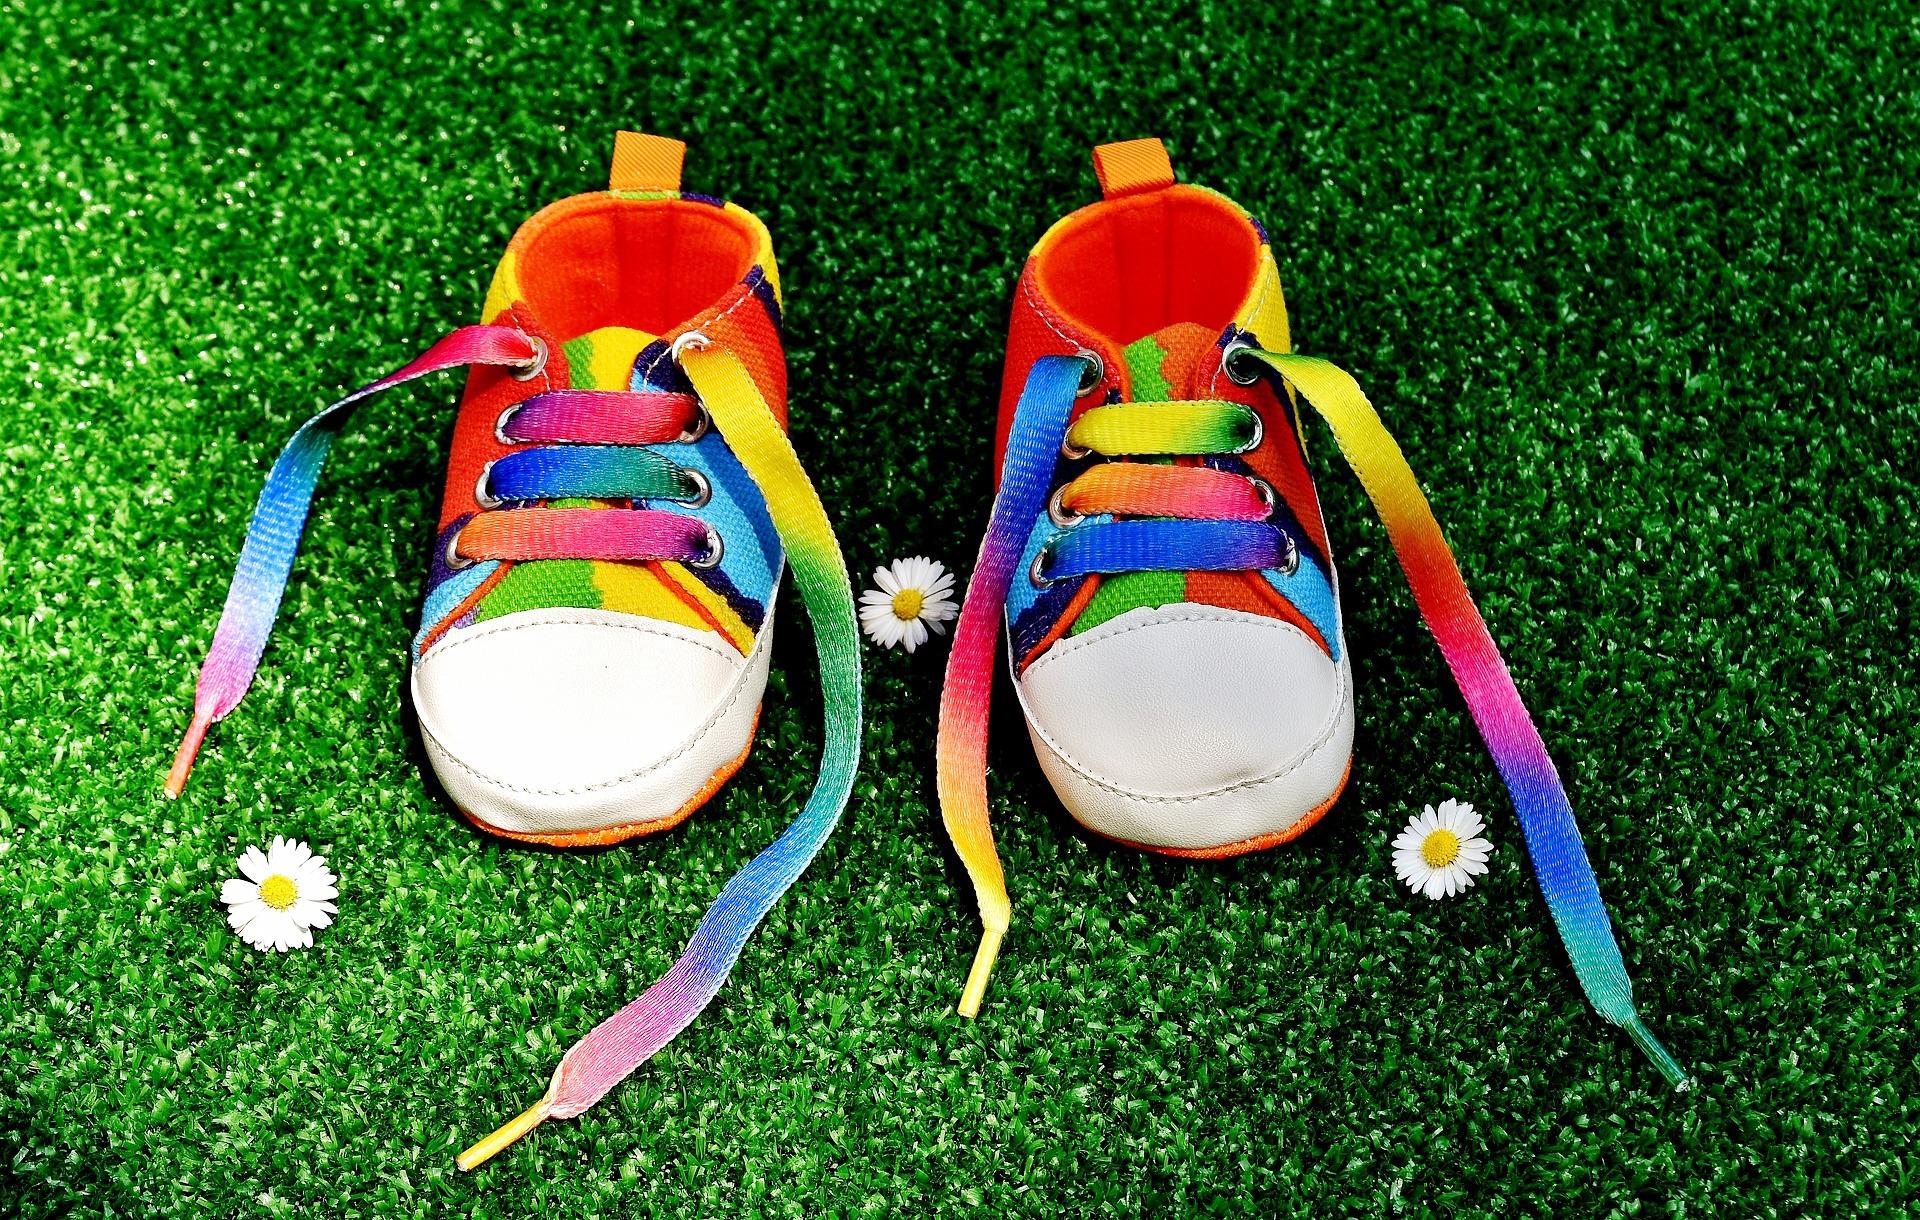 Rainbow colored baby shoes on bright green grass with a few daisies